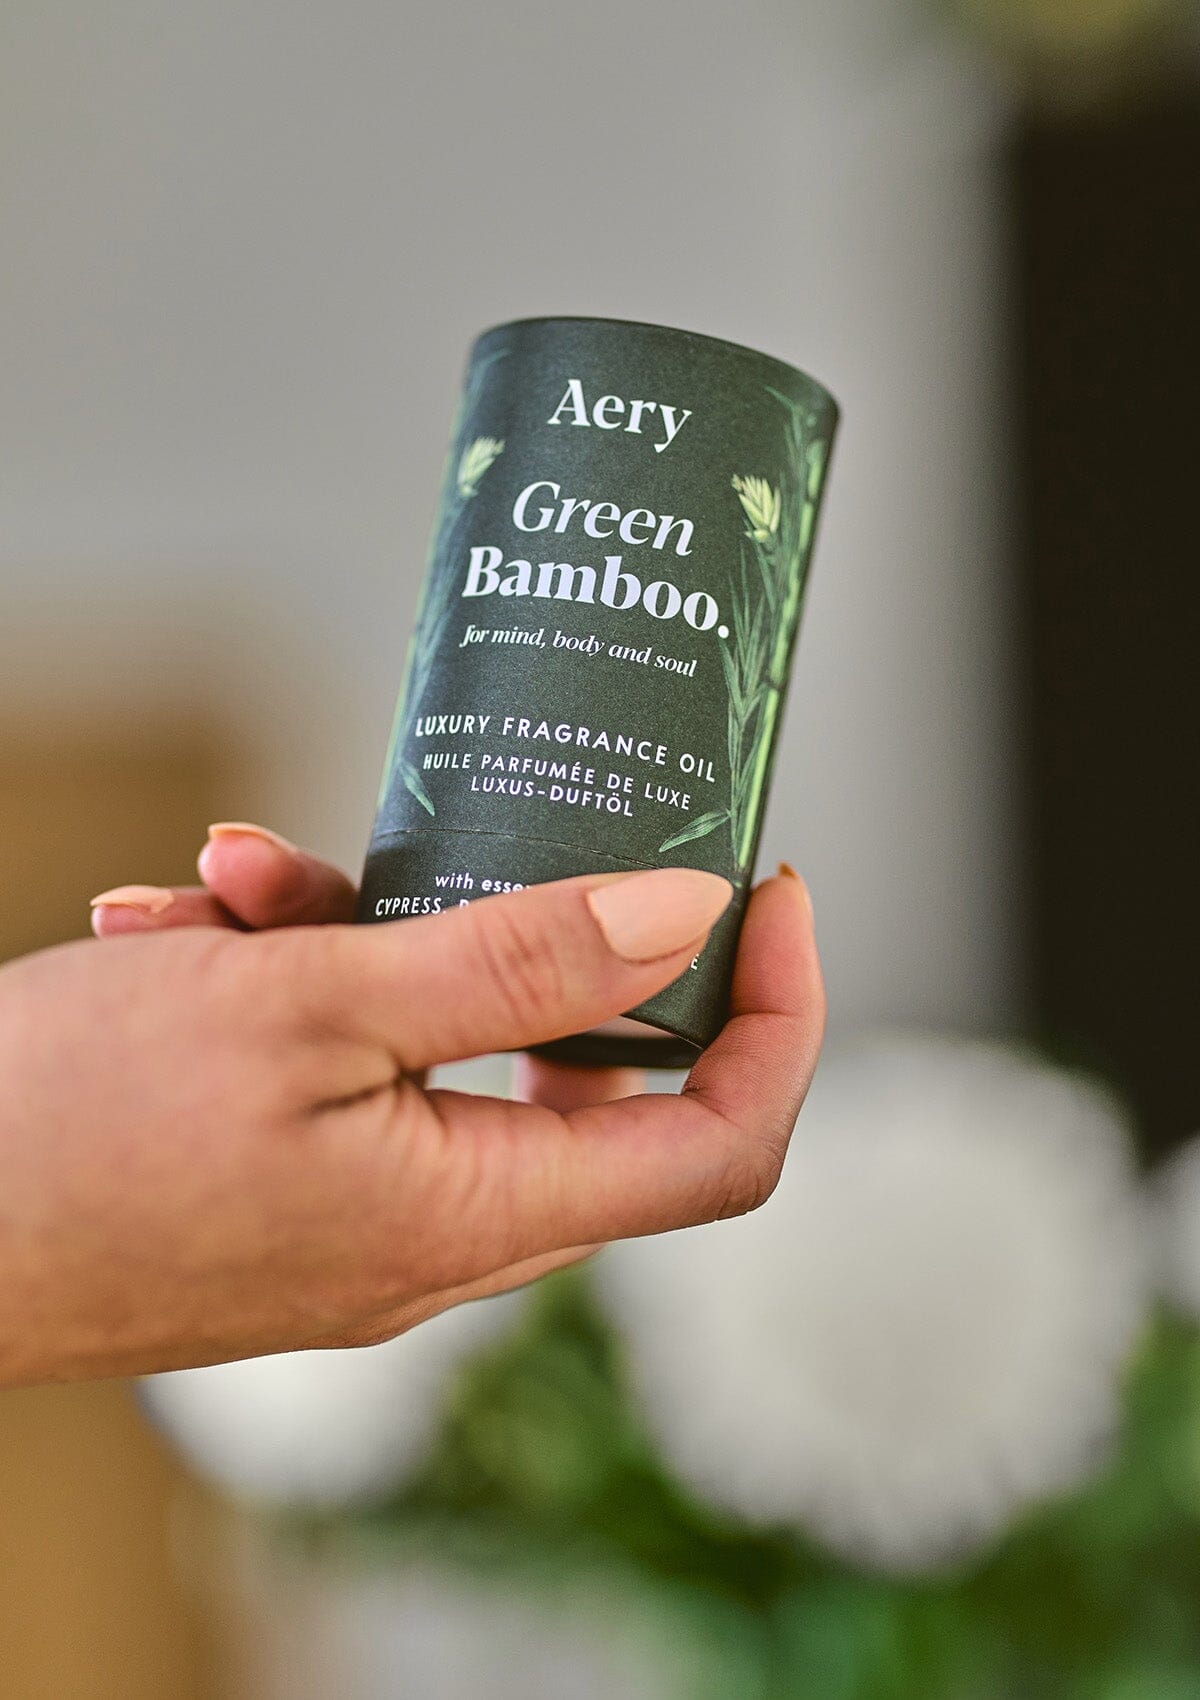 Green Bamboo fragrance oil  product packaging by Aery displayed in hand 